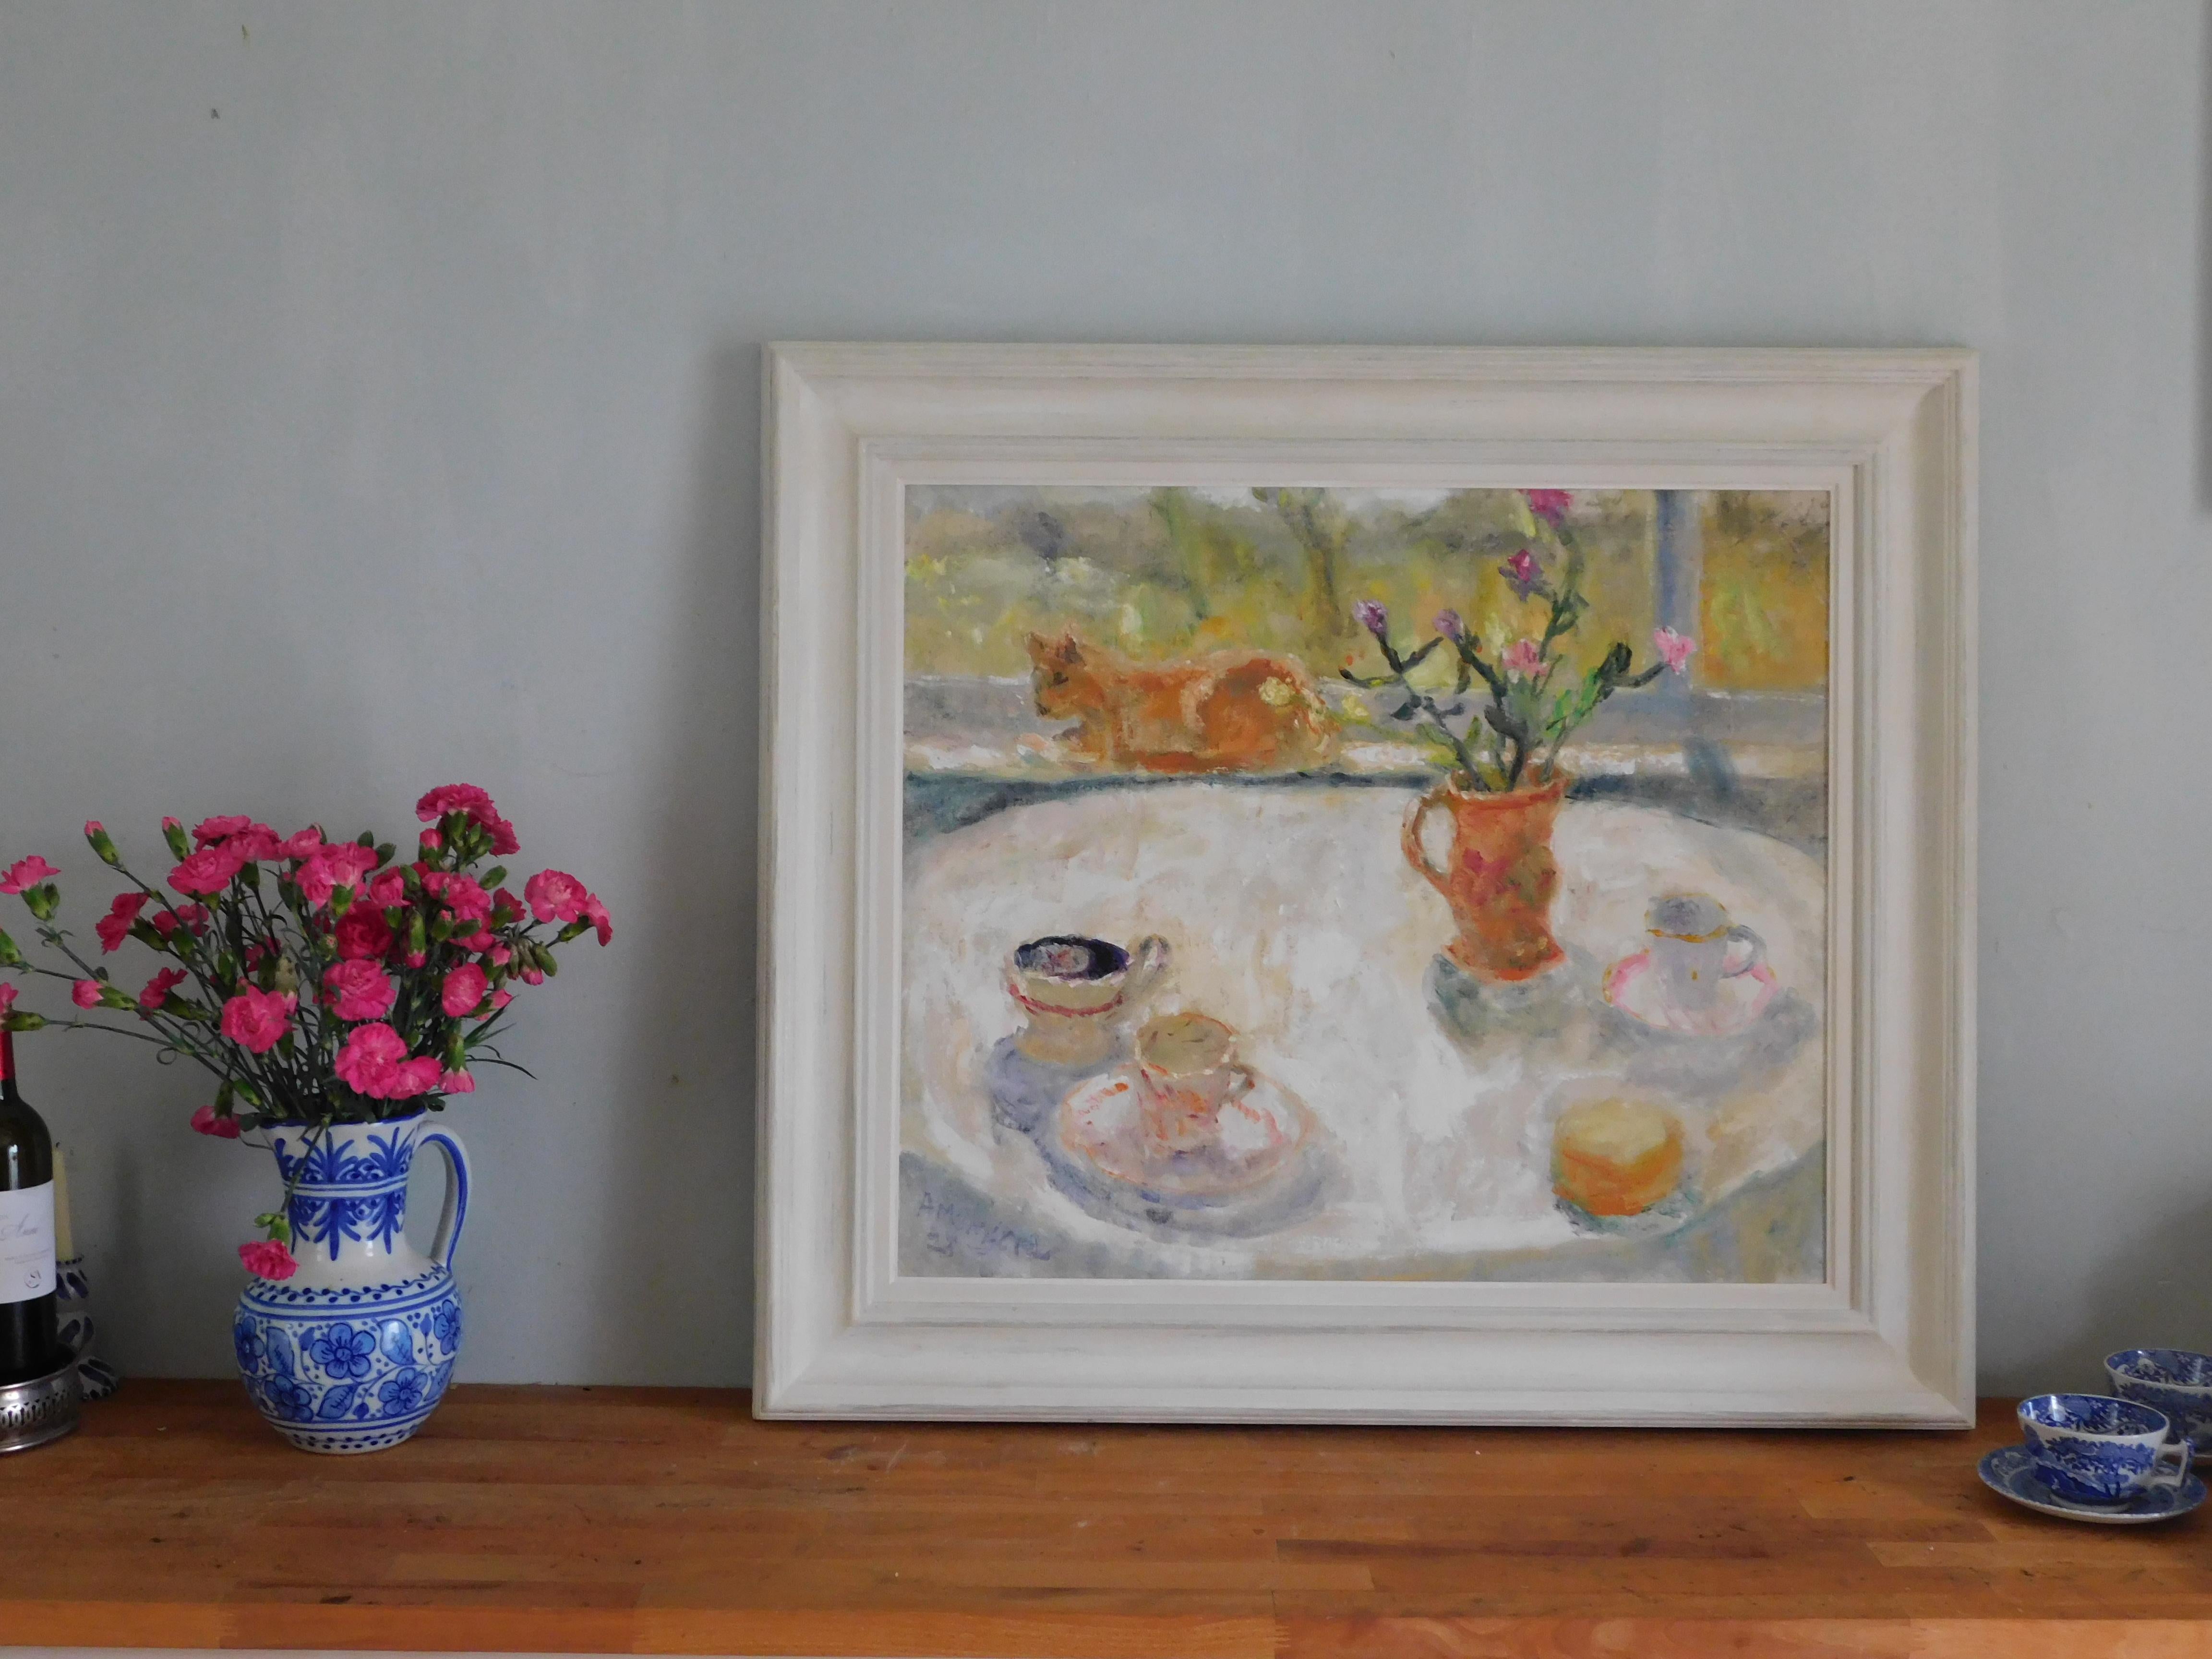 Afternoon Tea,

Sometimes finding an old tea cup and saucer in an antique or charity shop is the start of a still life set up. I think when you paint an object you seem to connect to it in a different way. Maybe it’s fanciful but I can imagine the